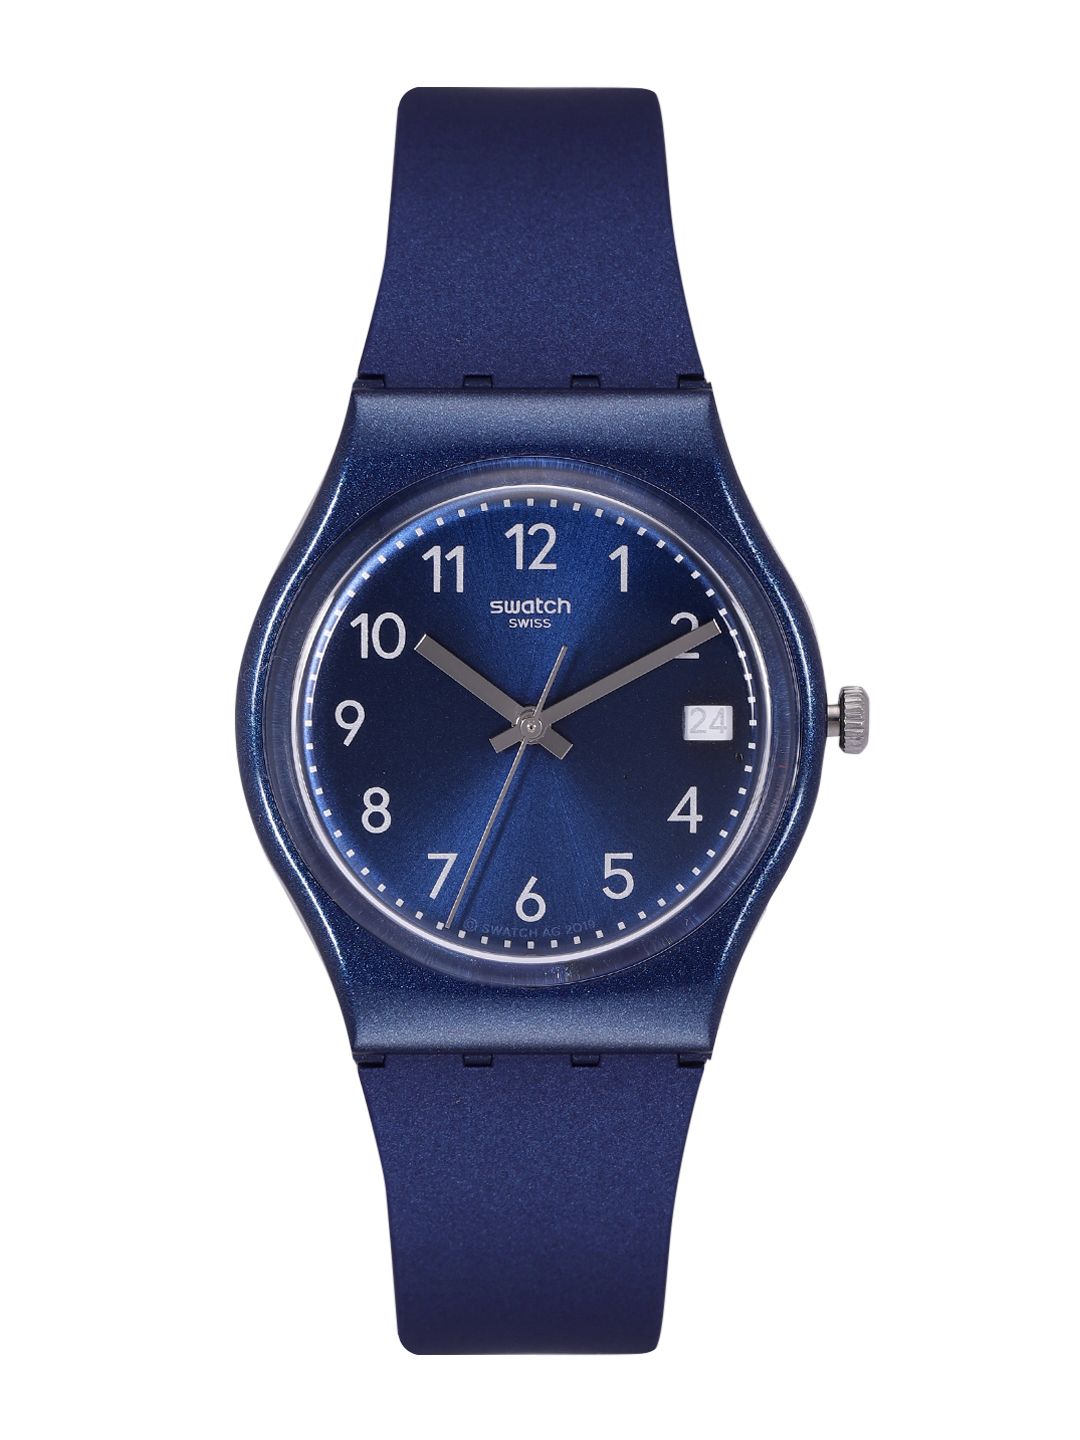 Swatch SwatchEssentials Unisex Navy Blue Water Resistant Analogue Watch GN416 Price in India